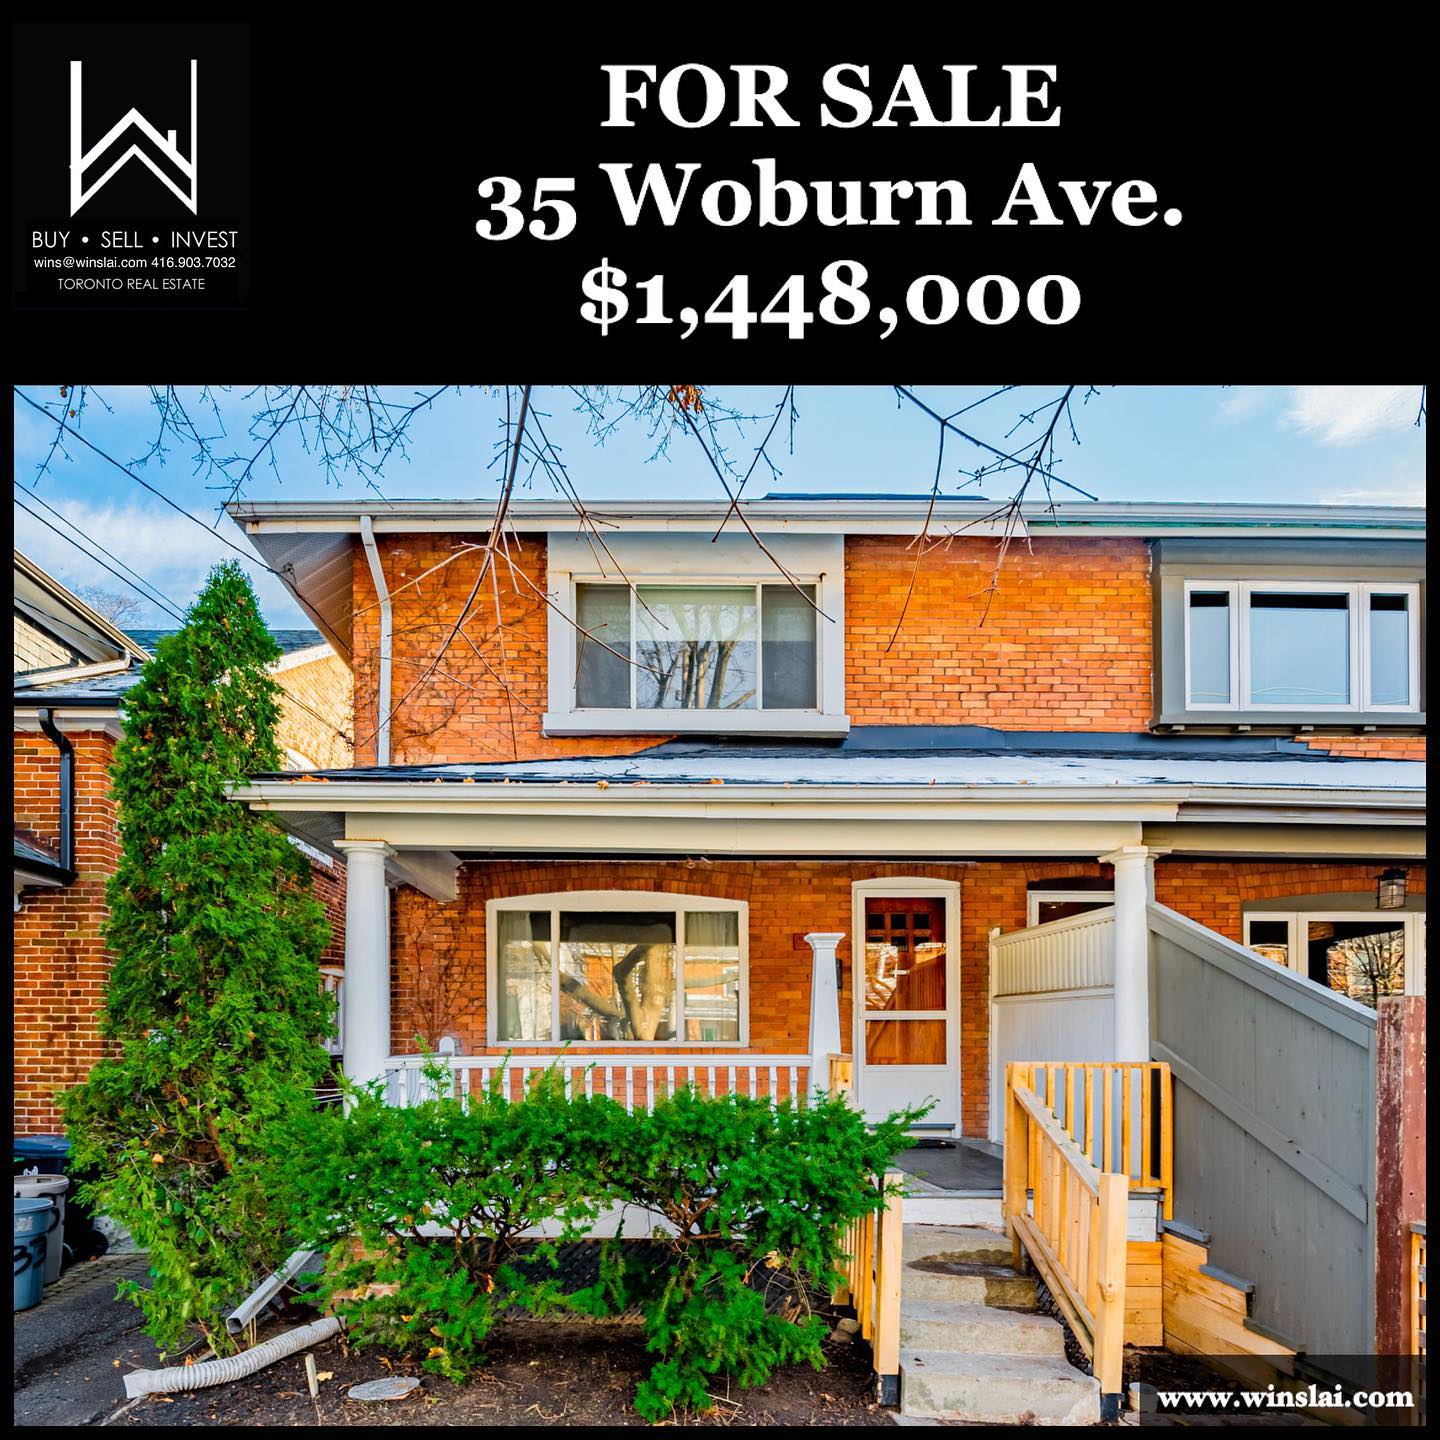 For Sale flyer for 35 Woburn Ave house.